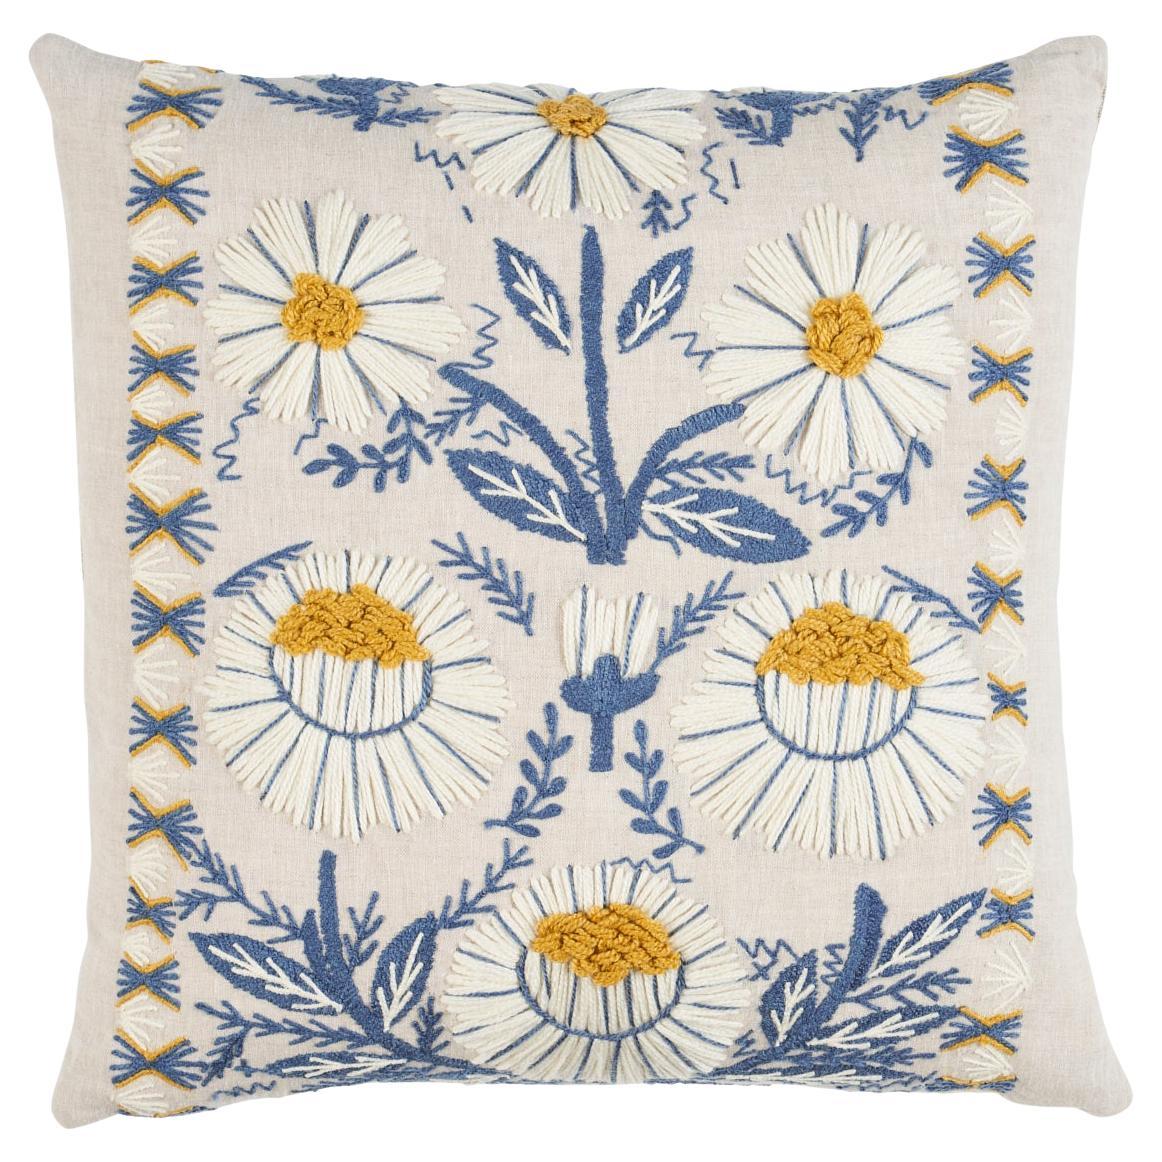 Shumacher Marguerite Embroidery 20" Pillow in Blue & Ochre For Sale